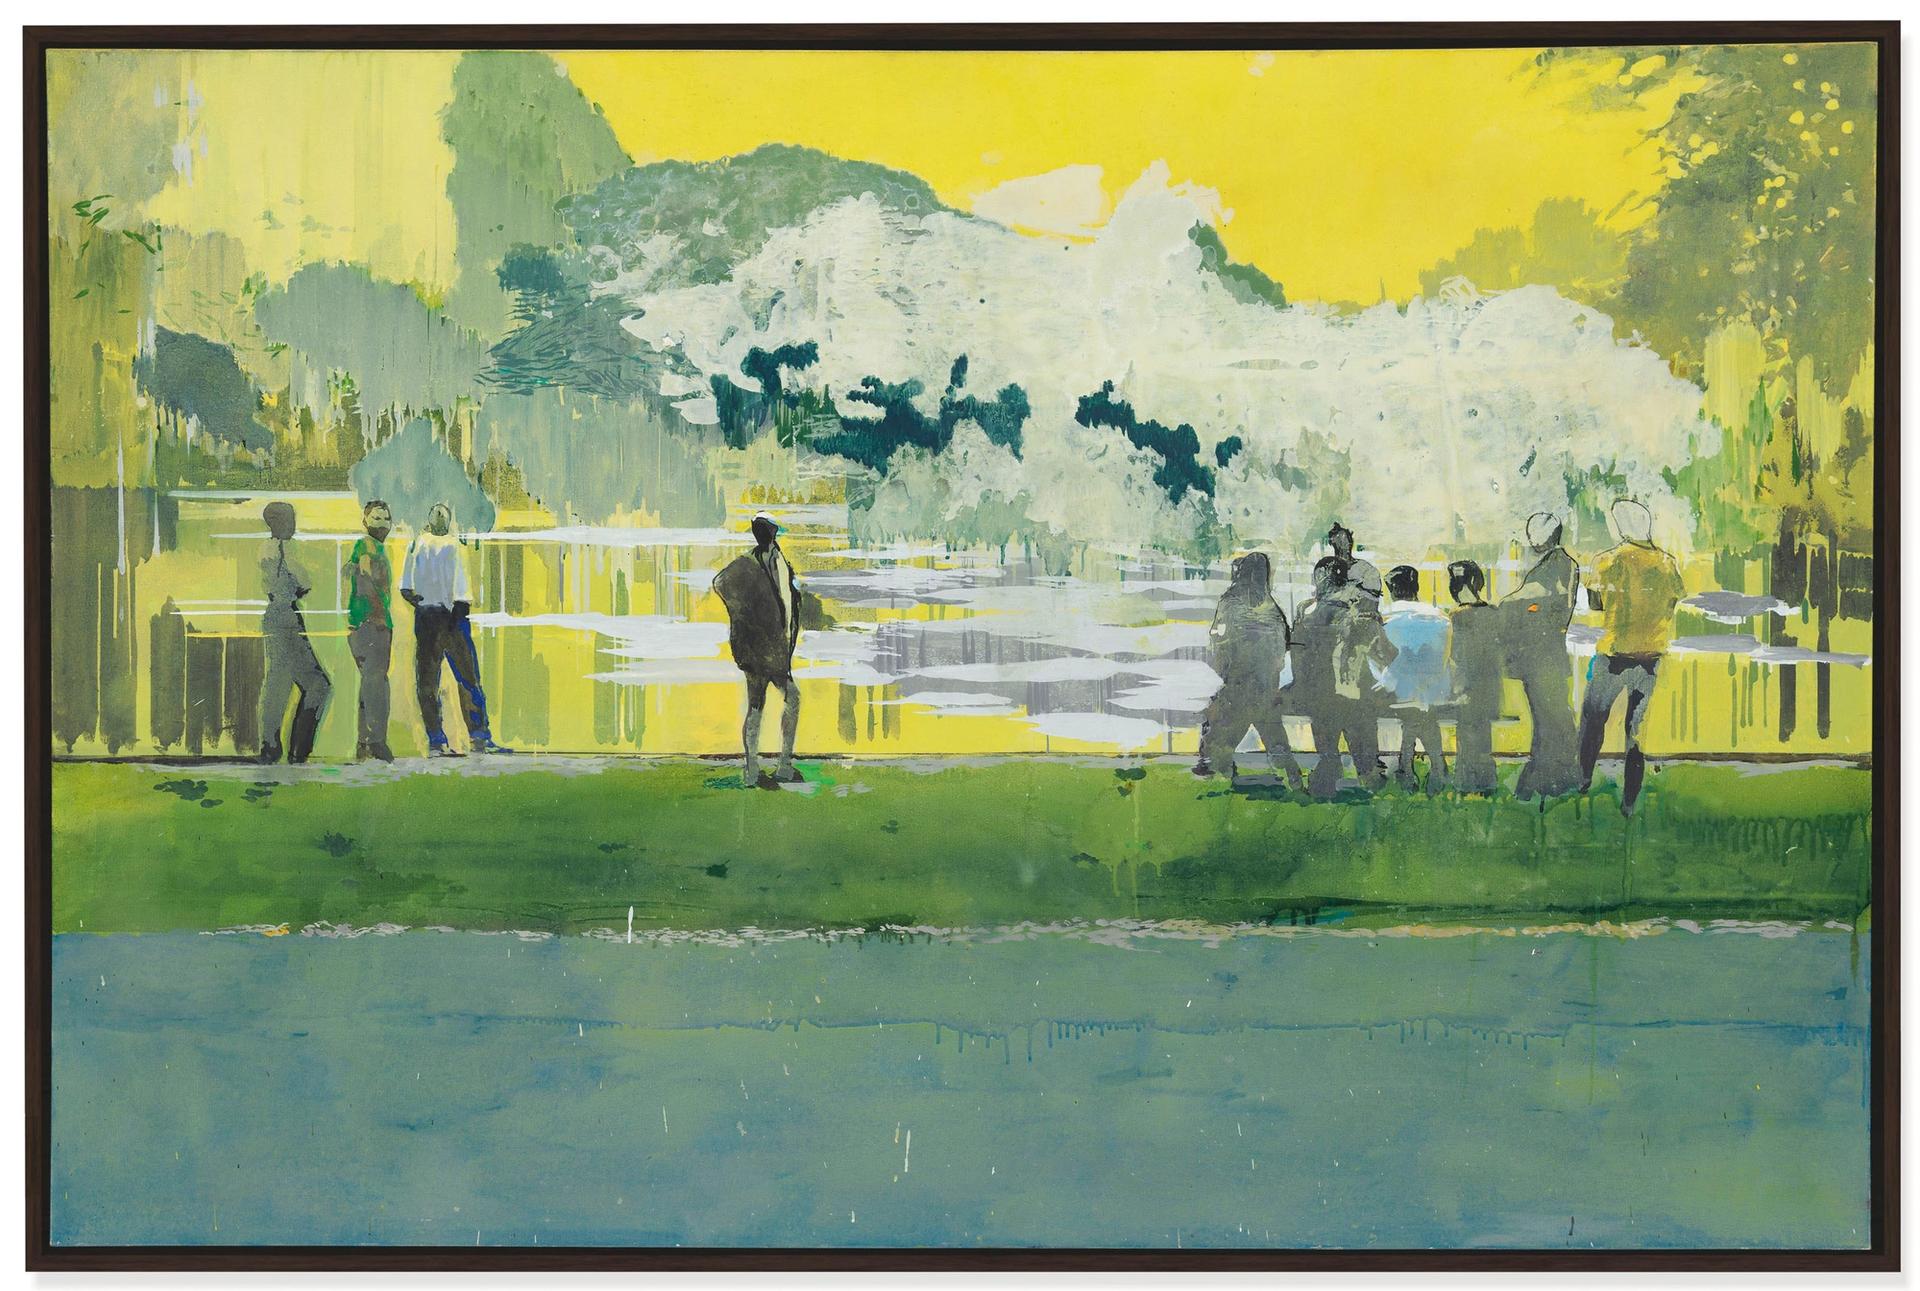 Ball Watching IV by Hurvin Anderson, sold for £1.6m (£1.9m with fees) © Christie's and courtesy of the artist